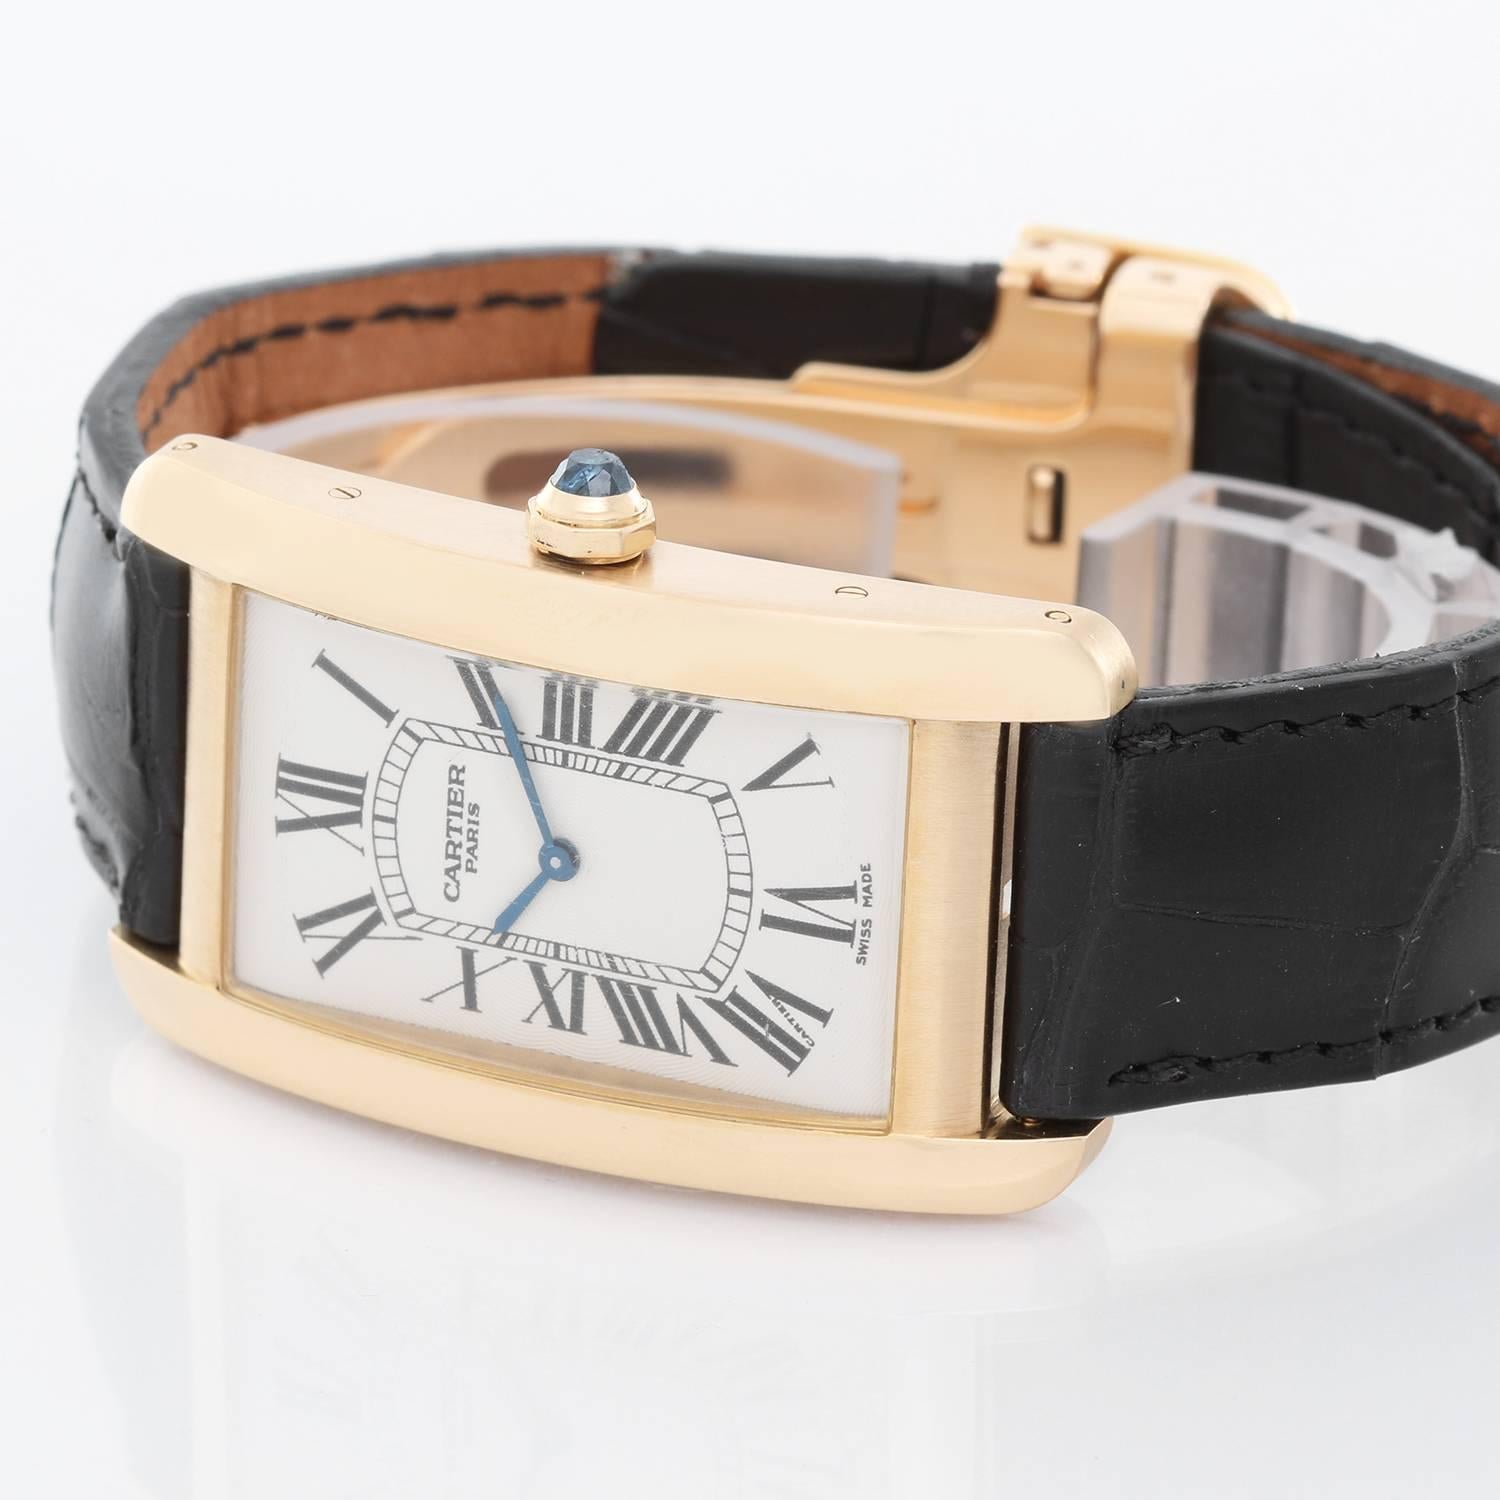 Cartier Tank Americaine (or American) Large  Men's Gold Watch -  Manual winding. 18k yellow gold rectangular style case (45 mm x 27 mm). Silvered dial with black Roman numerals. Strap band with 18k yellow gold Cartier buckle. Pre-owned with  box.